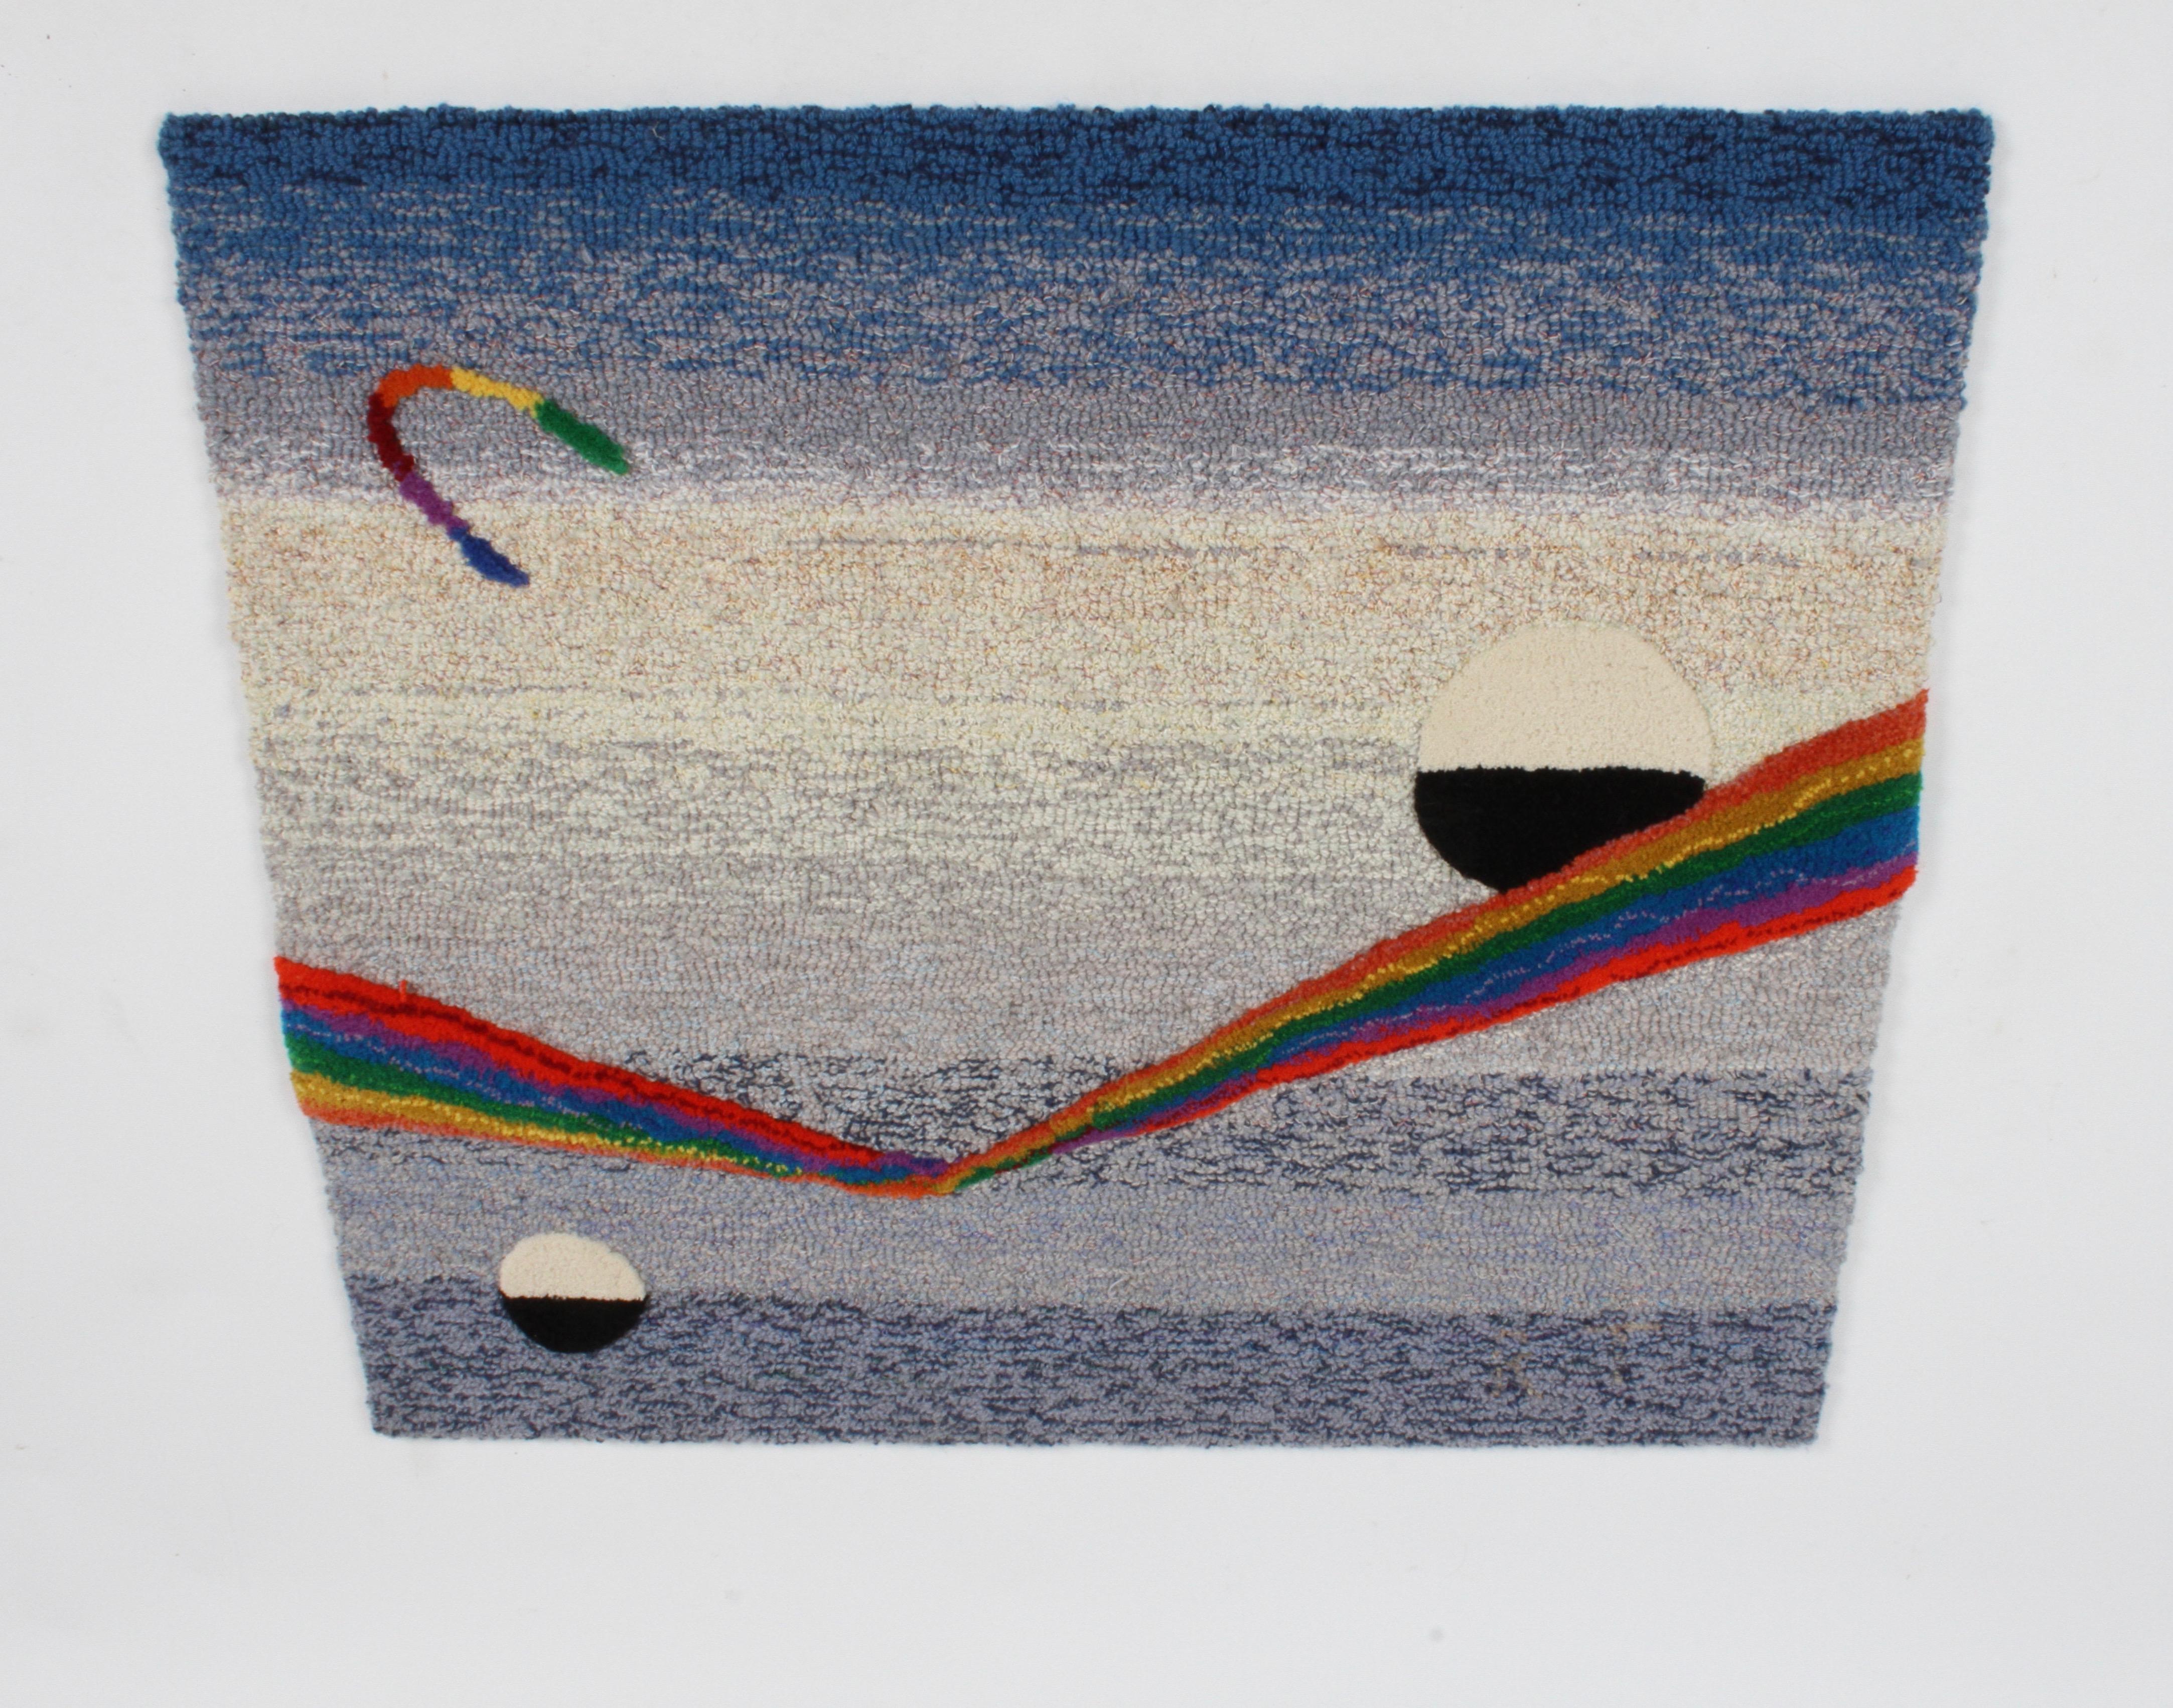 Designer rugs of Australia, circa 1980s wool wall tapestry, hanging or rug, titled Space Fantasy and signed R.T on front. Raised plush rainbow spectrum and two black & white planets on blue tone and cream gradient background. Label on reverse has